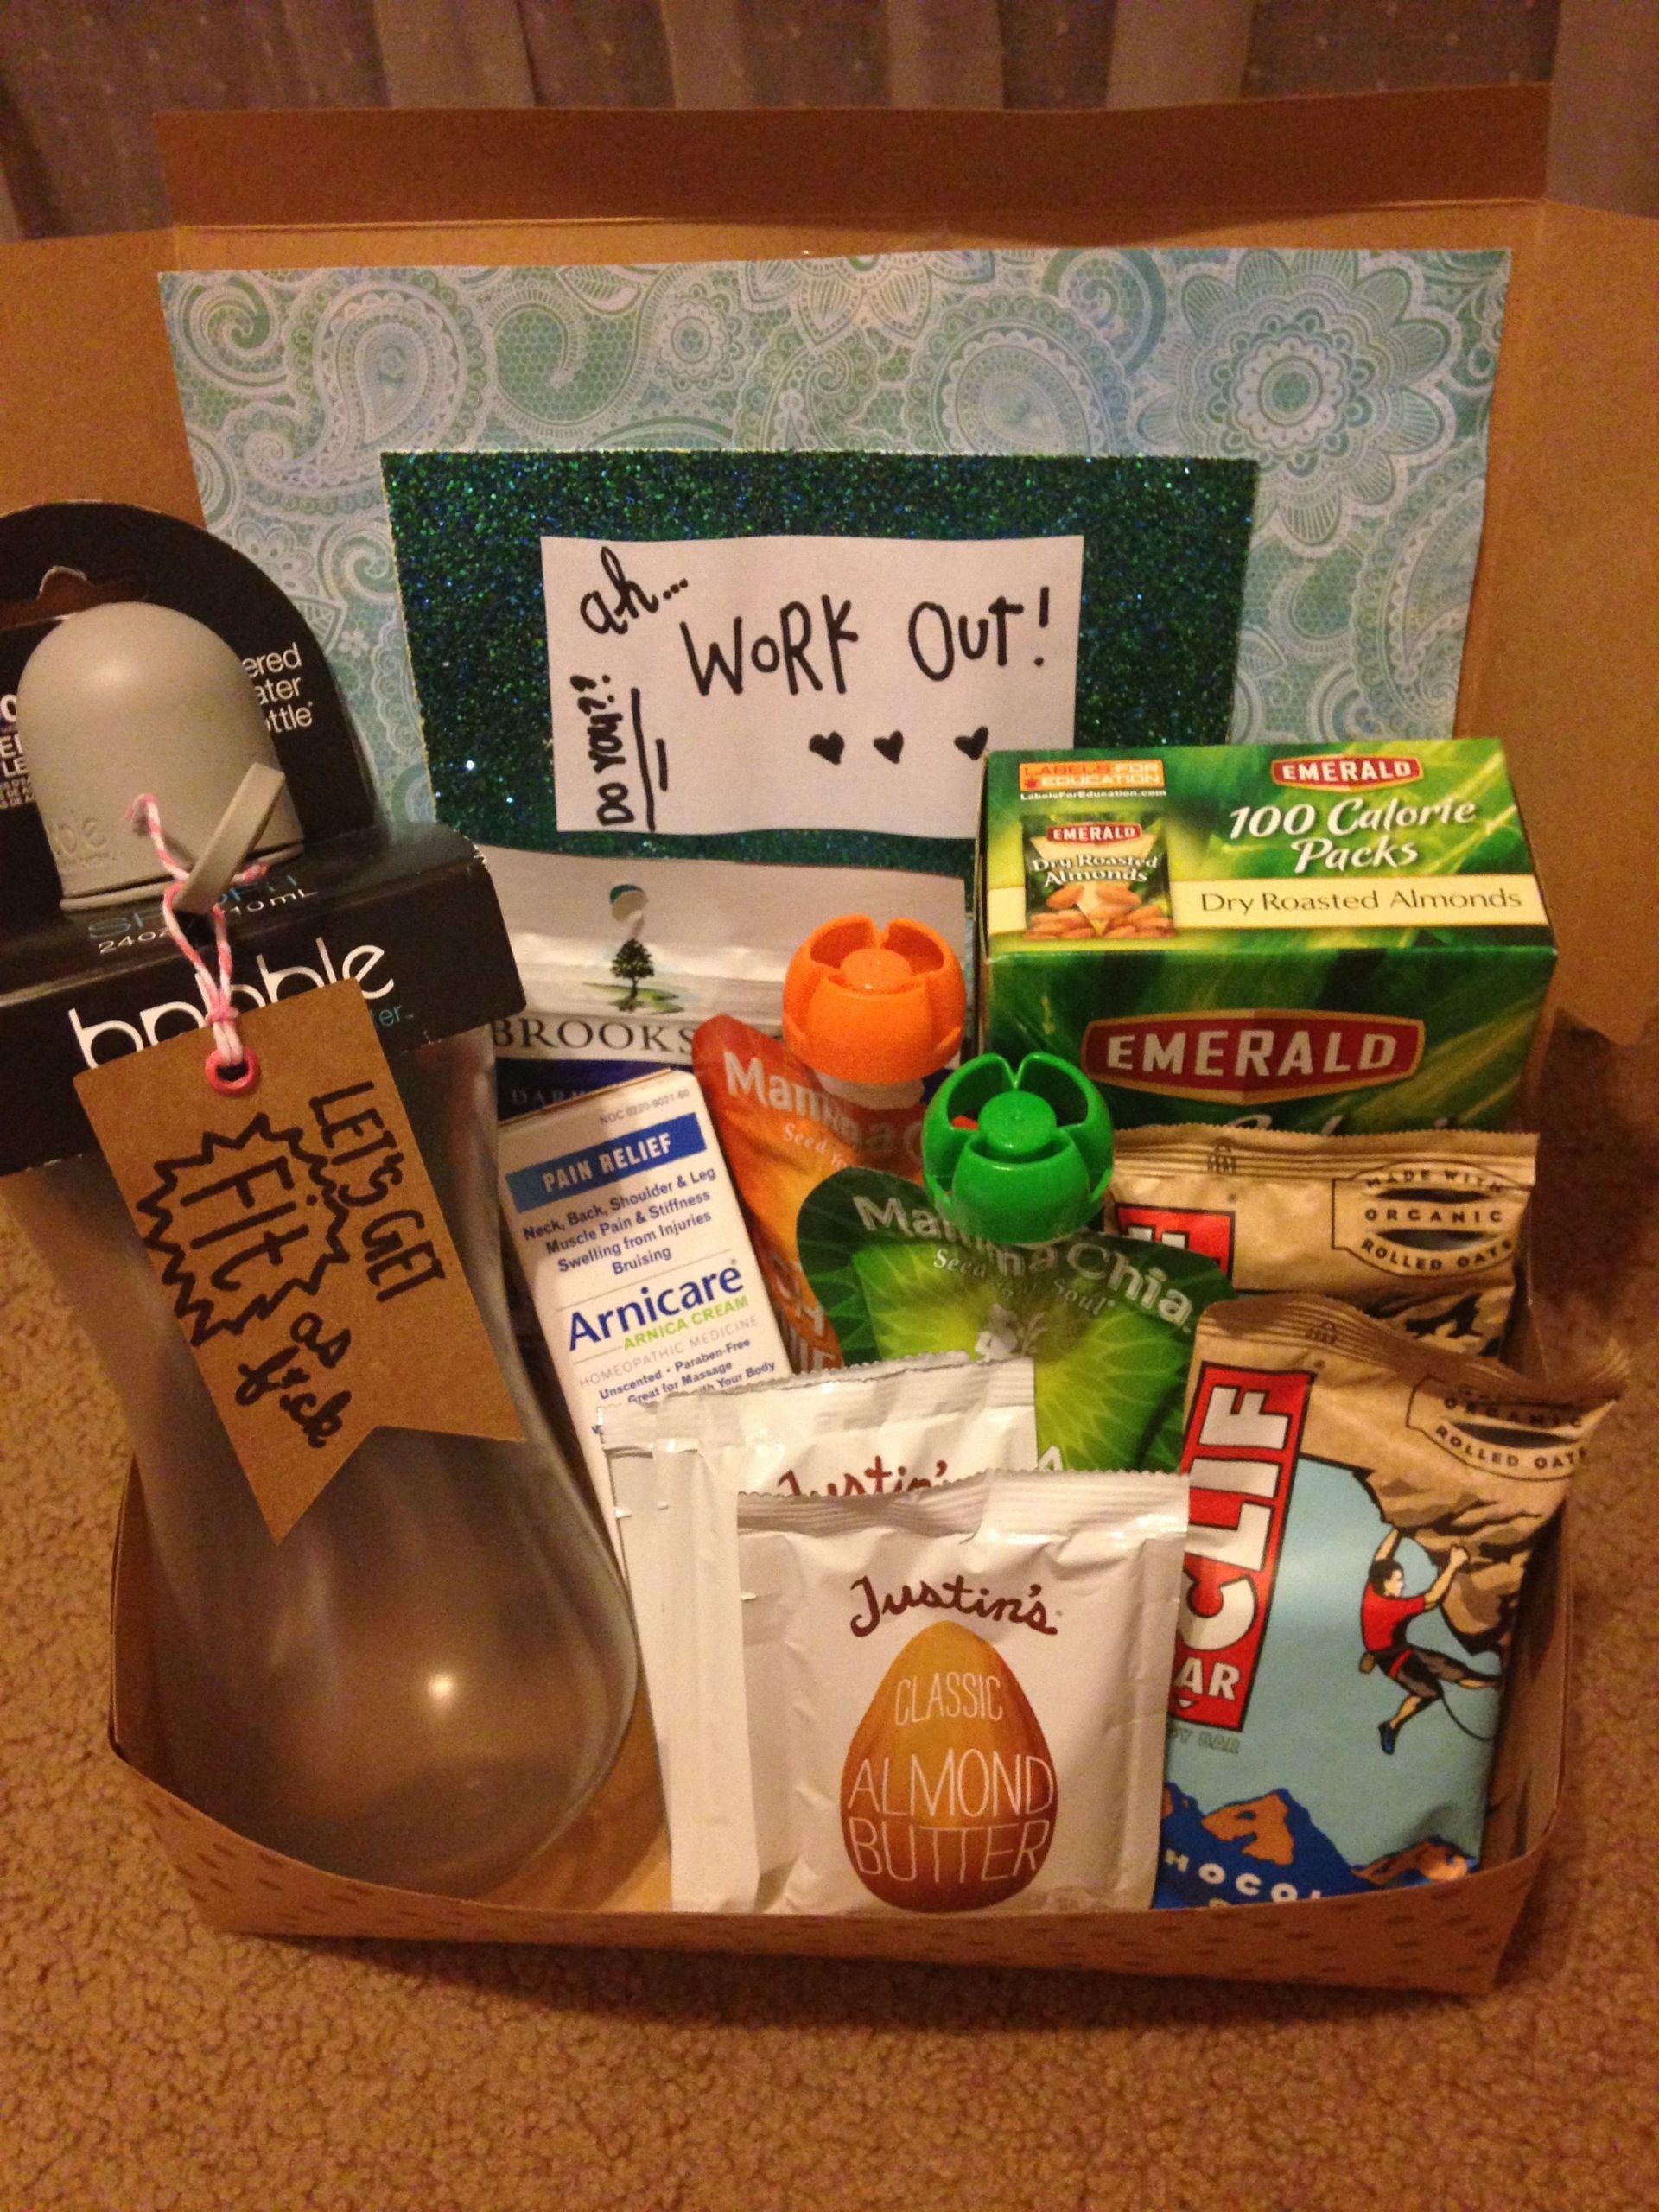 Exercise Gift Basket Ideas
 Workout t basket for one of my friends